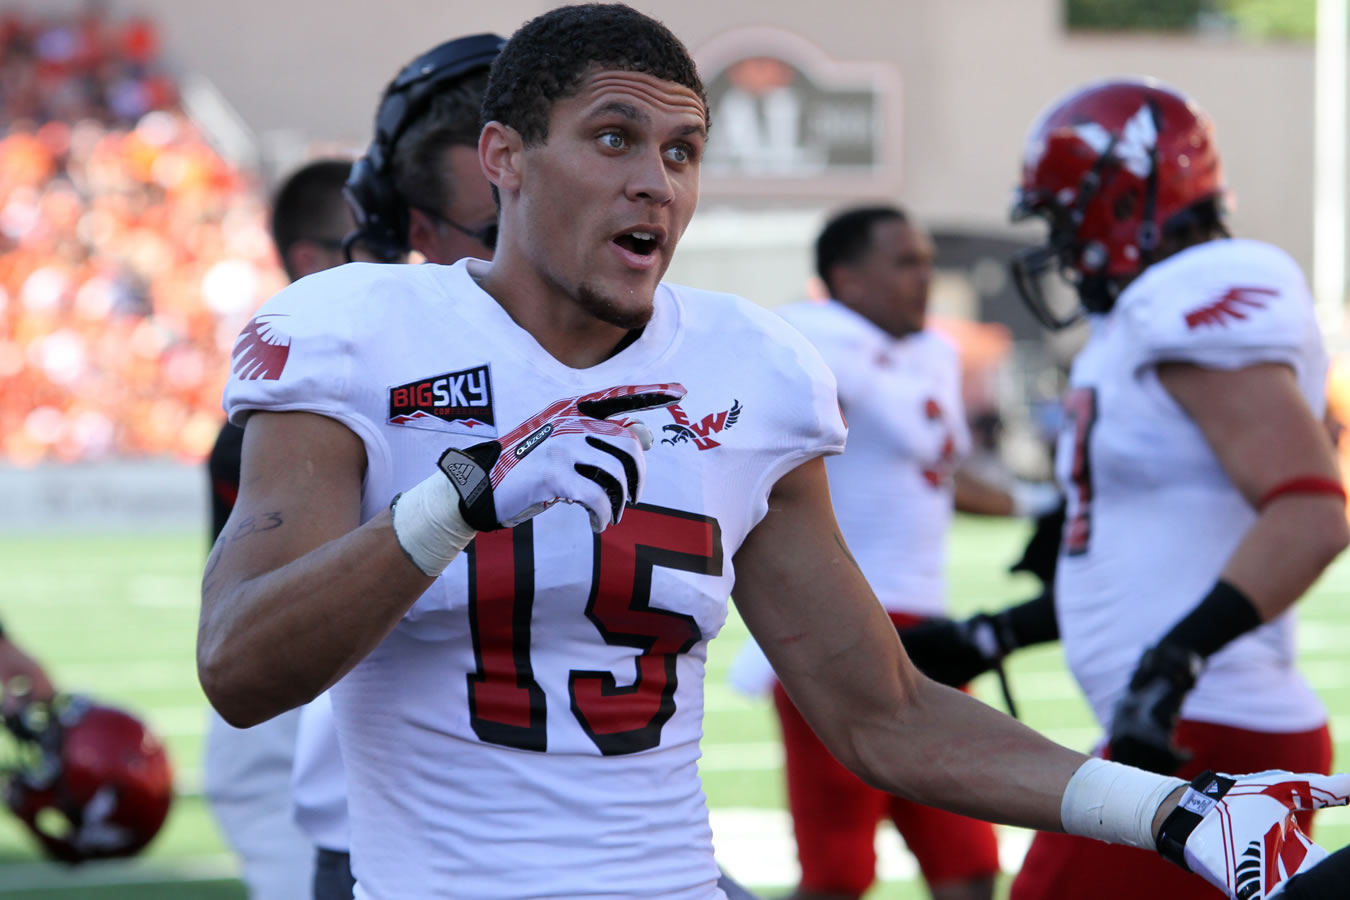 Heritage graduate Ashton Clark caught nine passes for 155 yards and one touchdown against Oregon State.